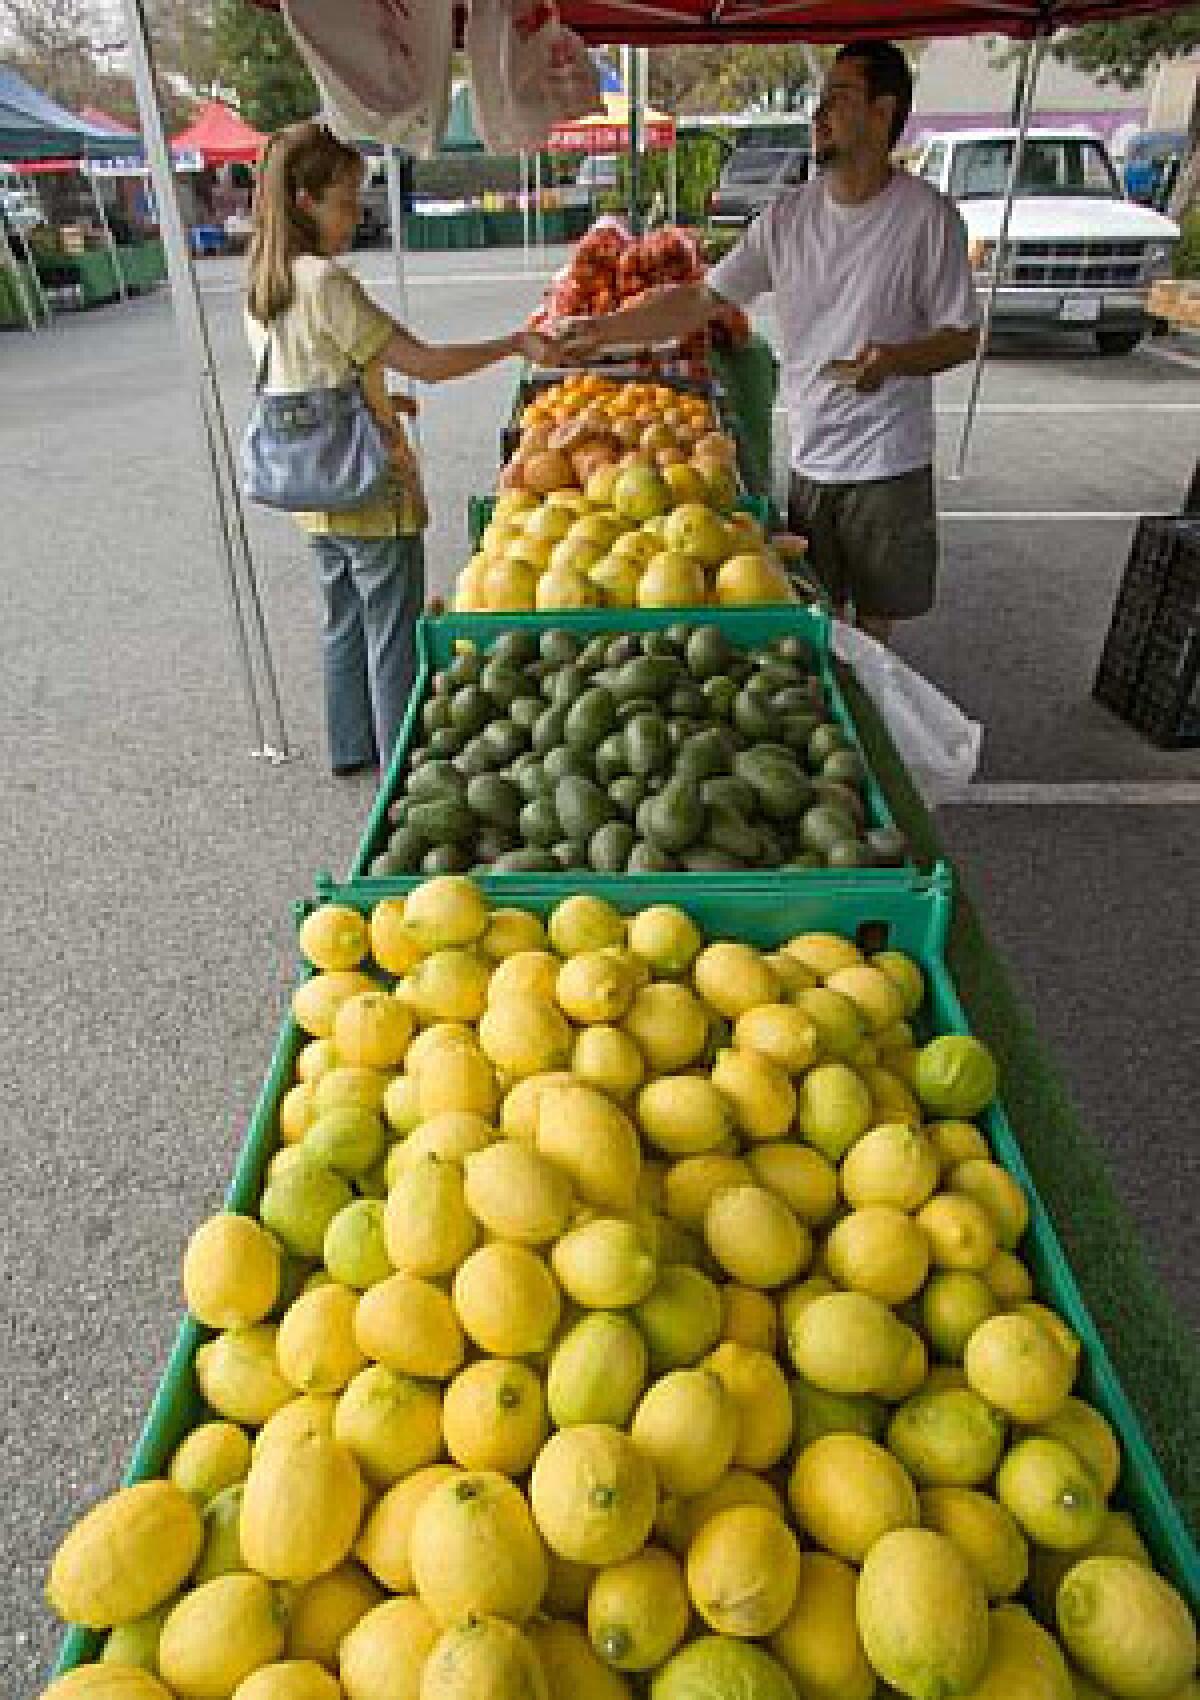 Jason Casper, a vendor for Tilden Farms, sells Valencia and navel oranges, Star Ruby grapefruit, Oroblanco pummelo hybrids, Hass avocados and Lisbon lemons, grown in Riverside and Pauma Valley, at the Whittier Uptown farmers market.